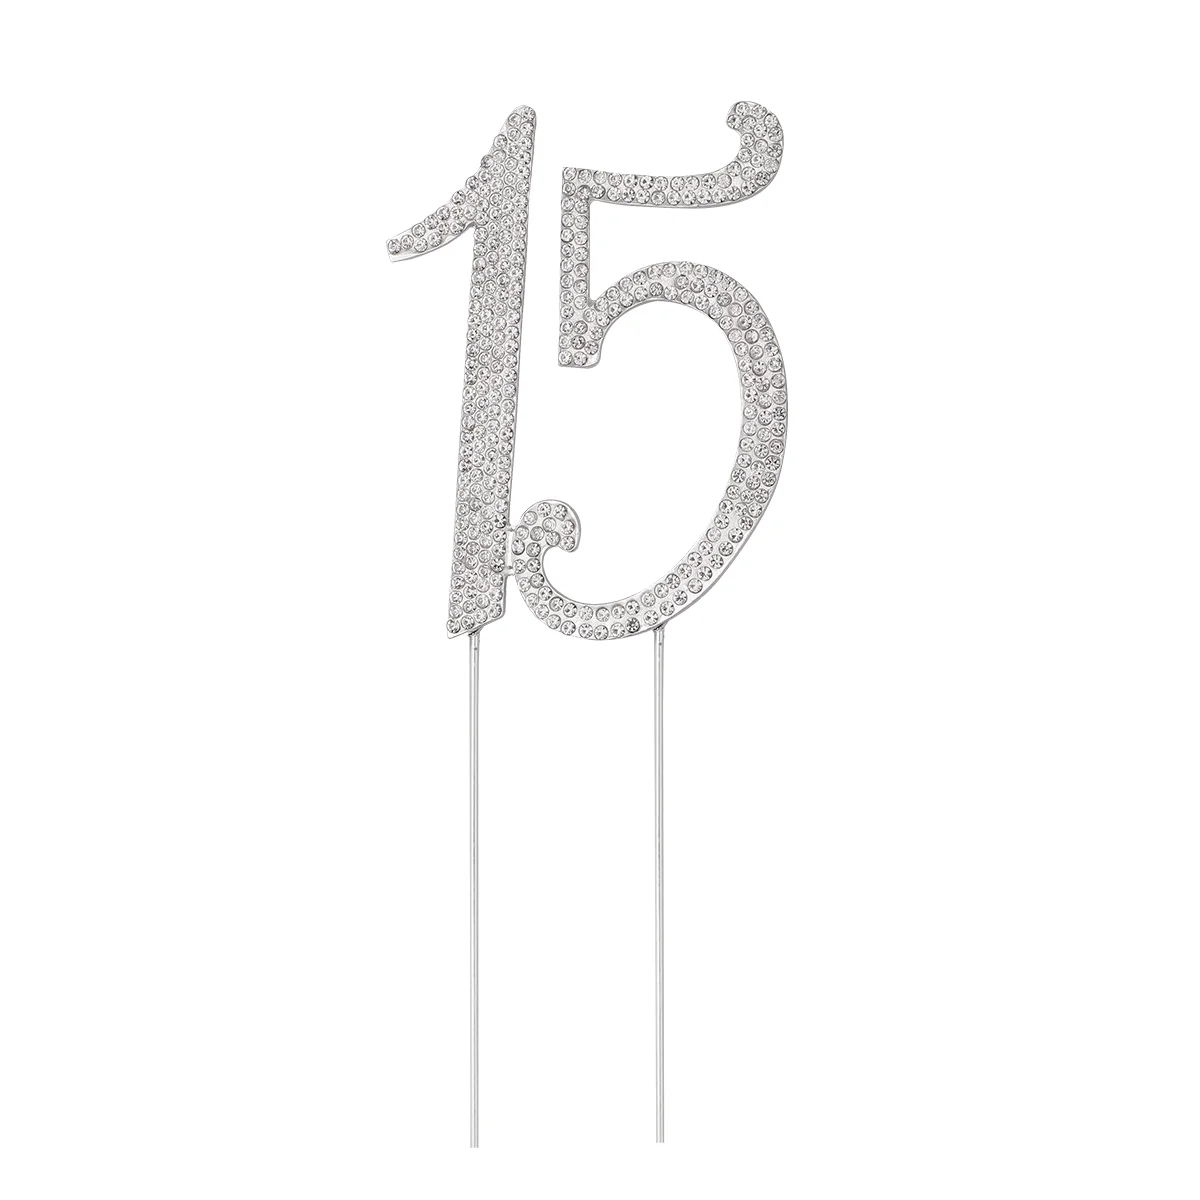 

Cupcake 15Th Topper Birthday Cake Picks Number Anniversary Decorations Party Toppers Happy Decoration Diamond Toothpicks Glitter